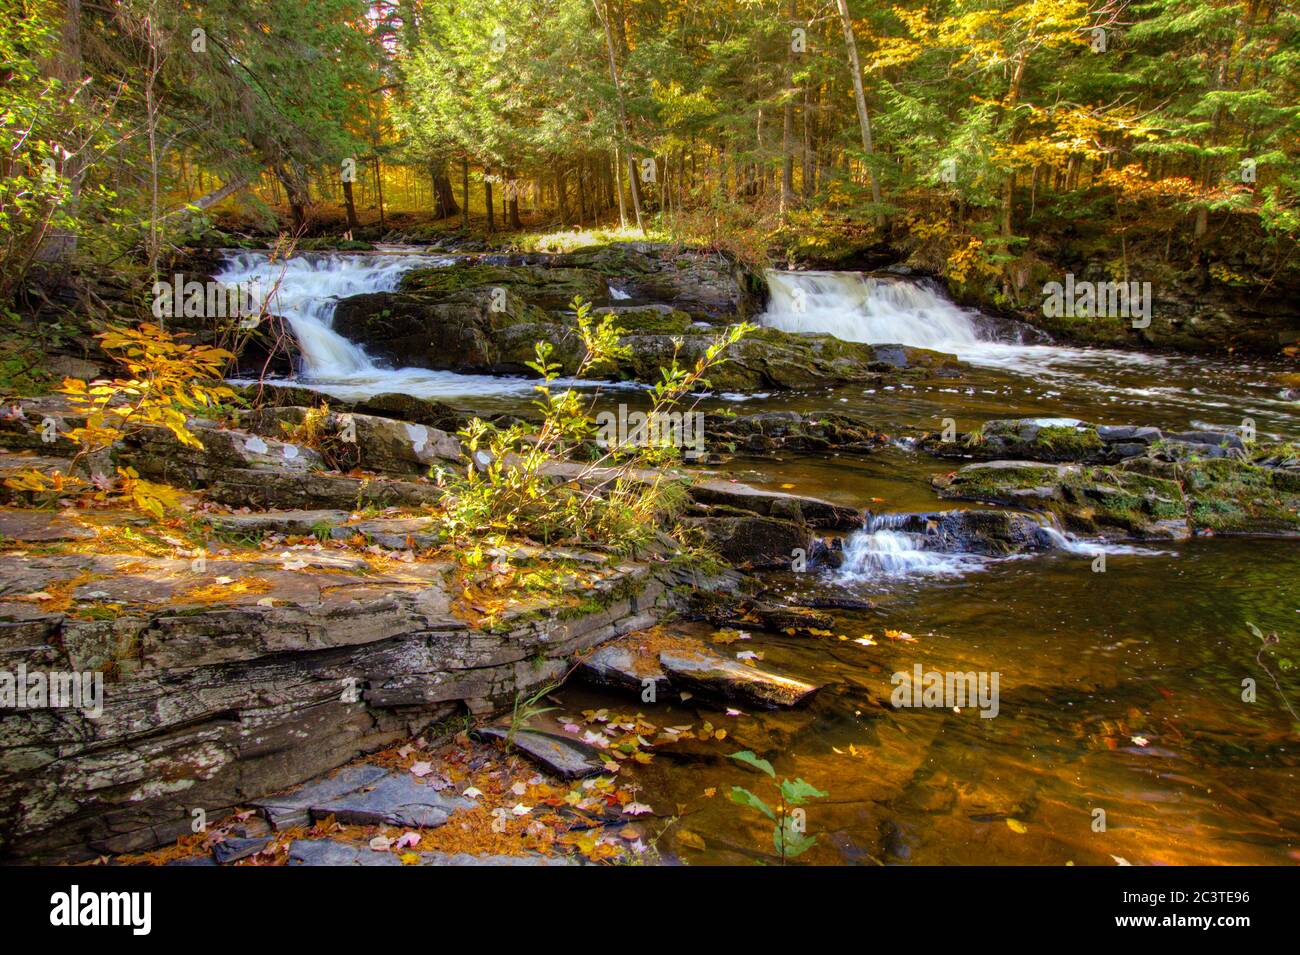 Double Waterfall with fall foliage on the Falls River in the small town of L'Anse in the Upper Peninsula of Michigan. Stock Photo